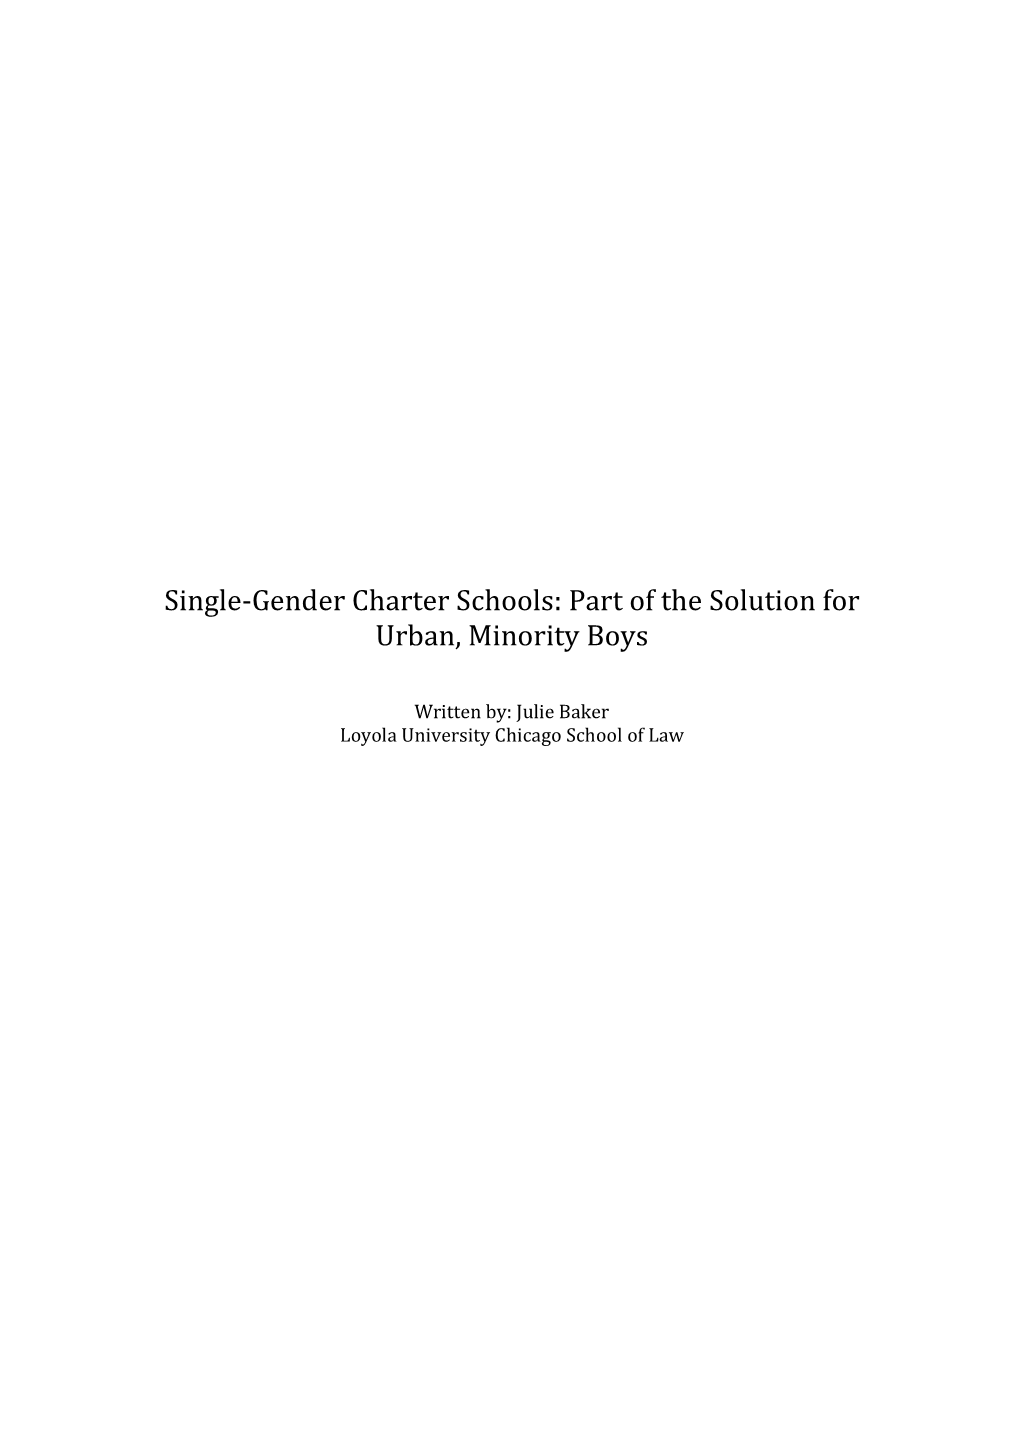 Single-Gender Charter Schools: Part of the Solution for Urban, Minority Boys